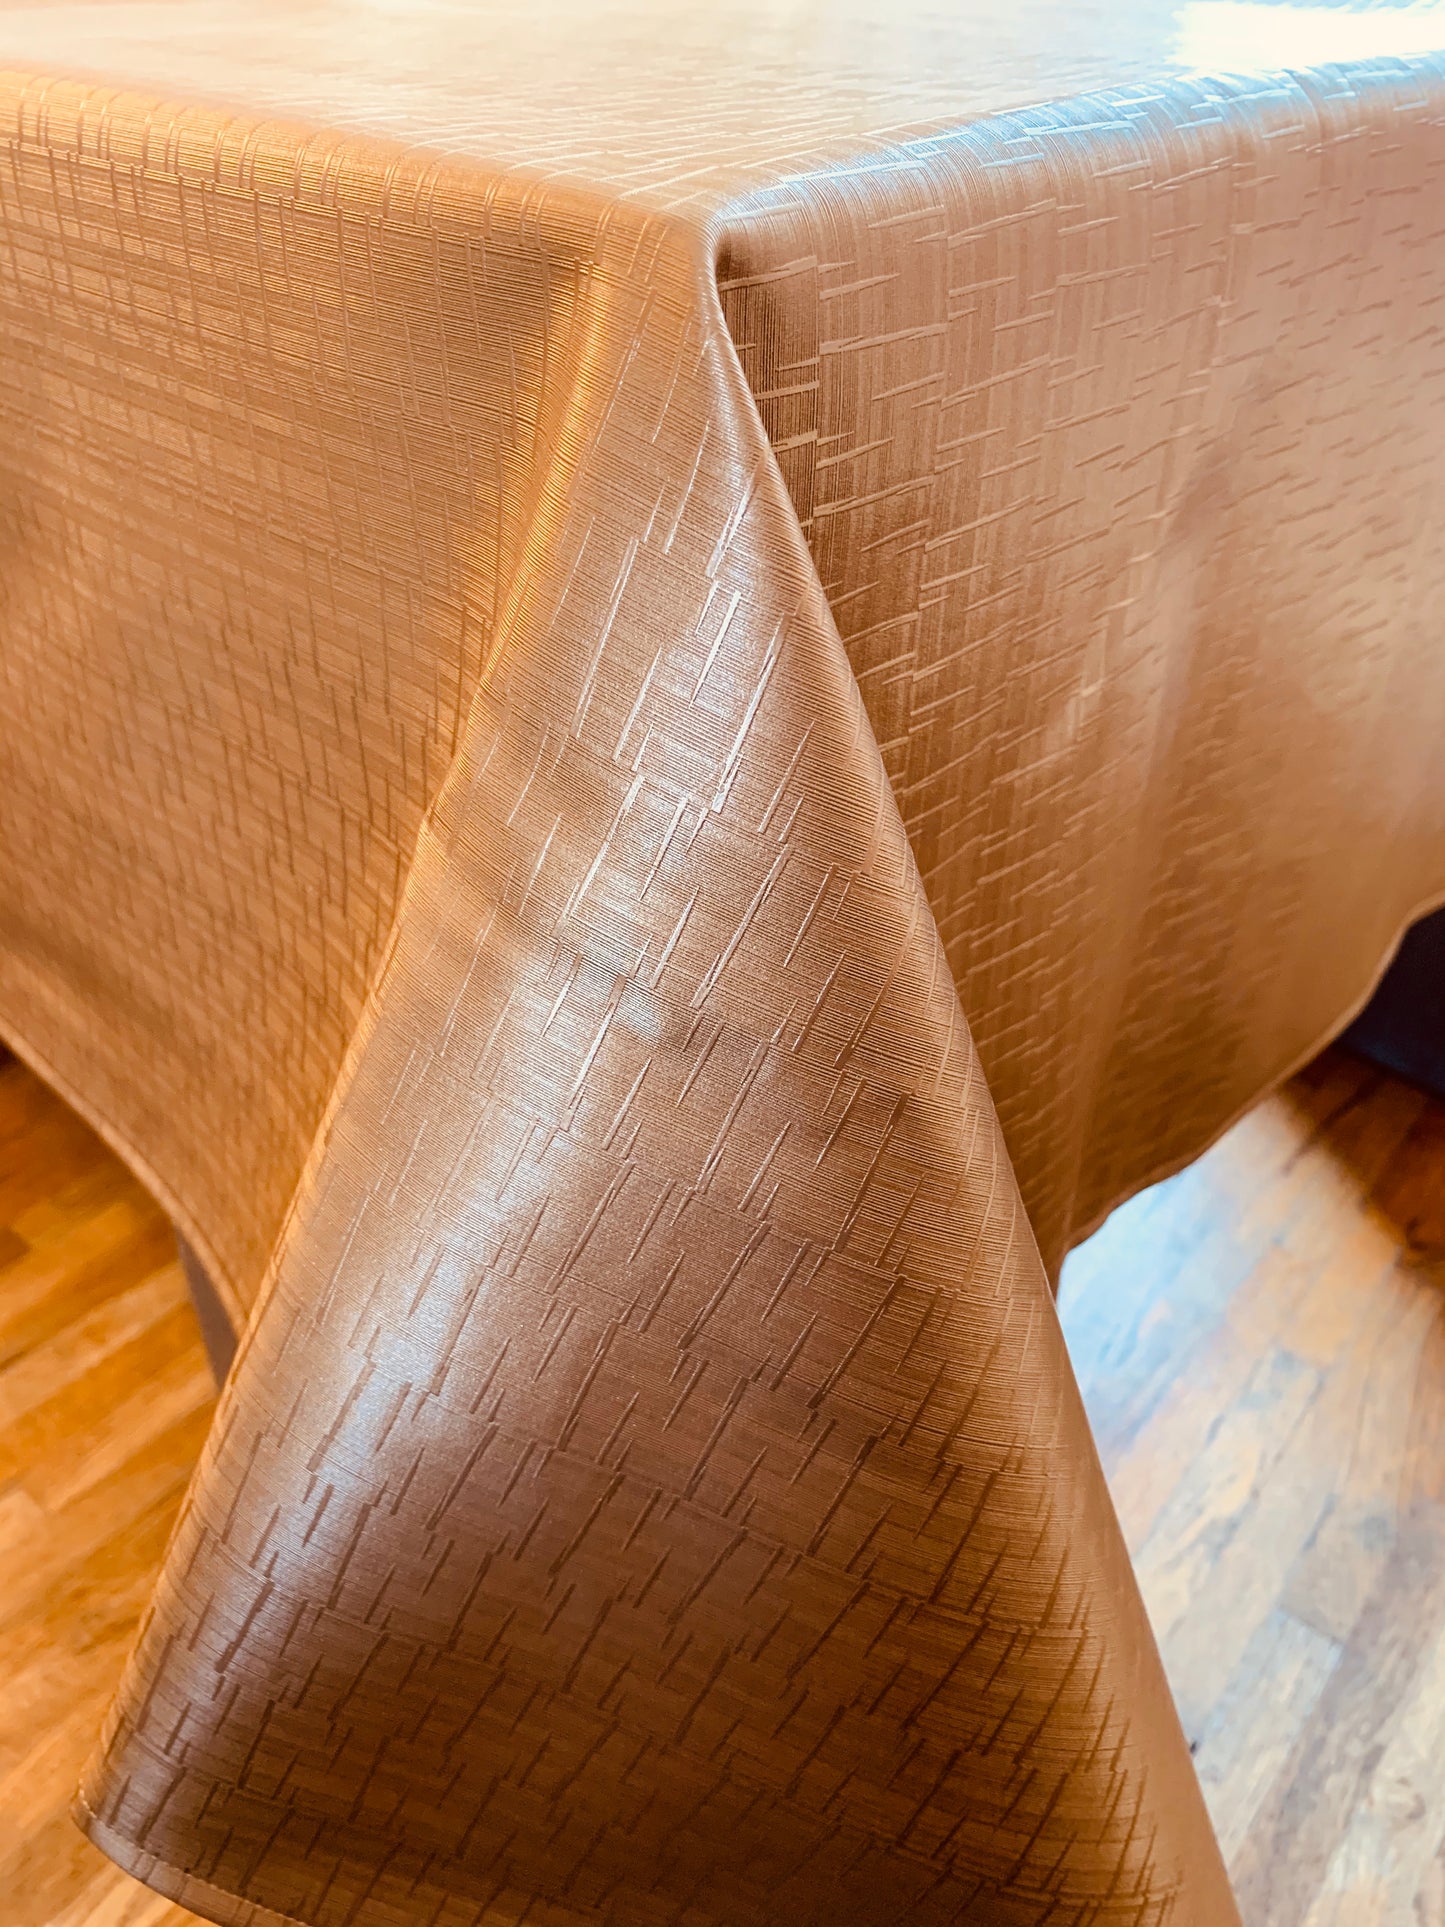 Bronze Waterproof stain resistant stain proof magic tablecloth. Pu leather/pvc faux leather.